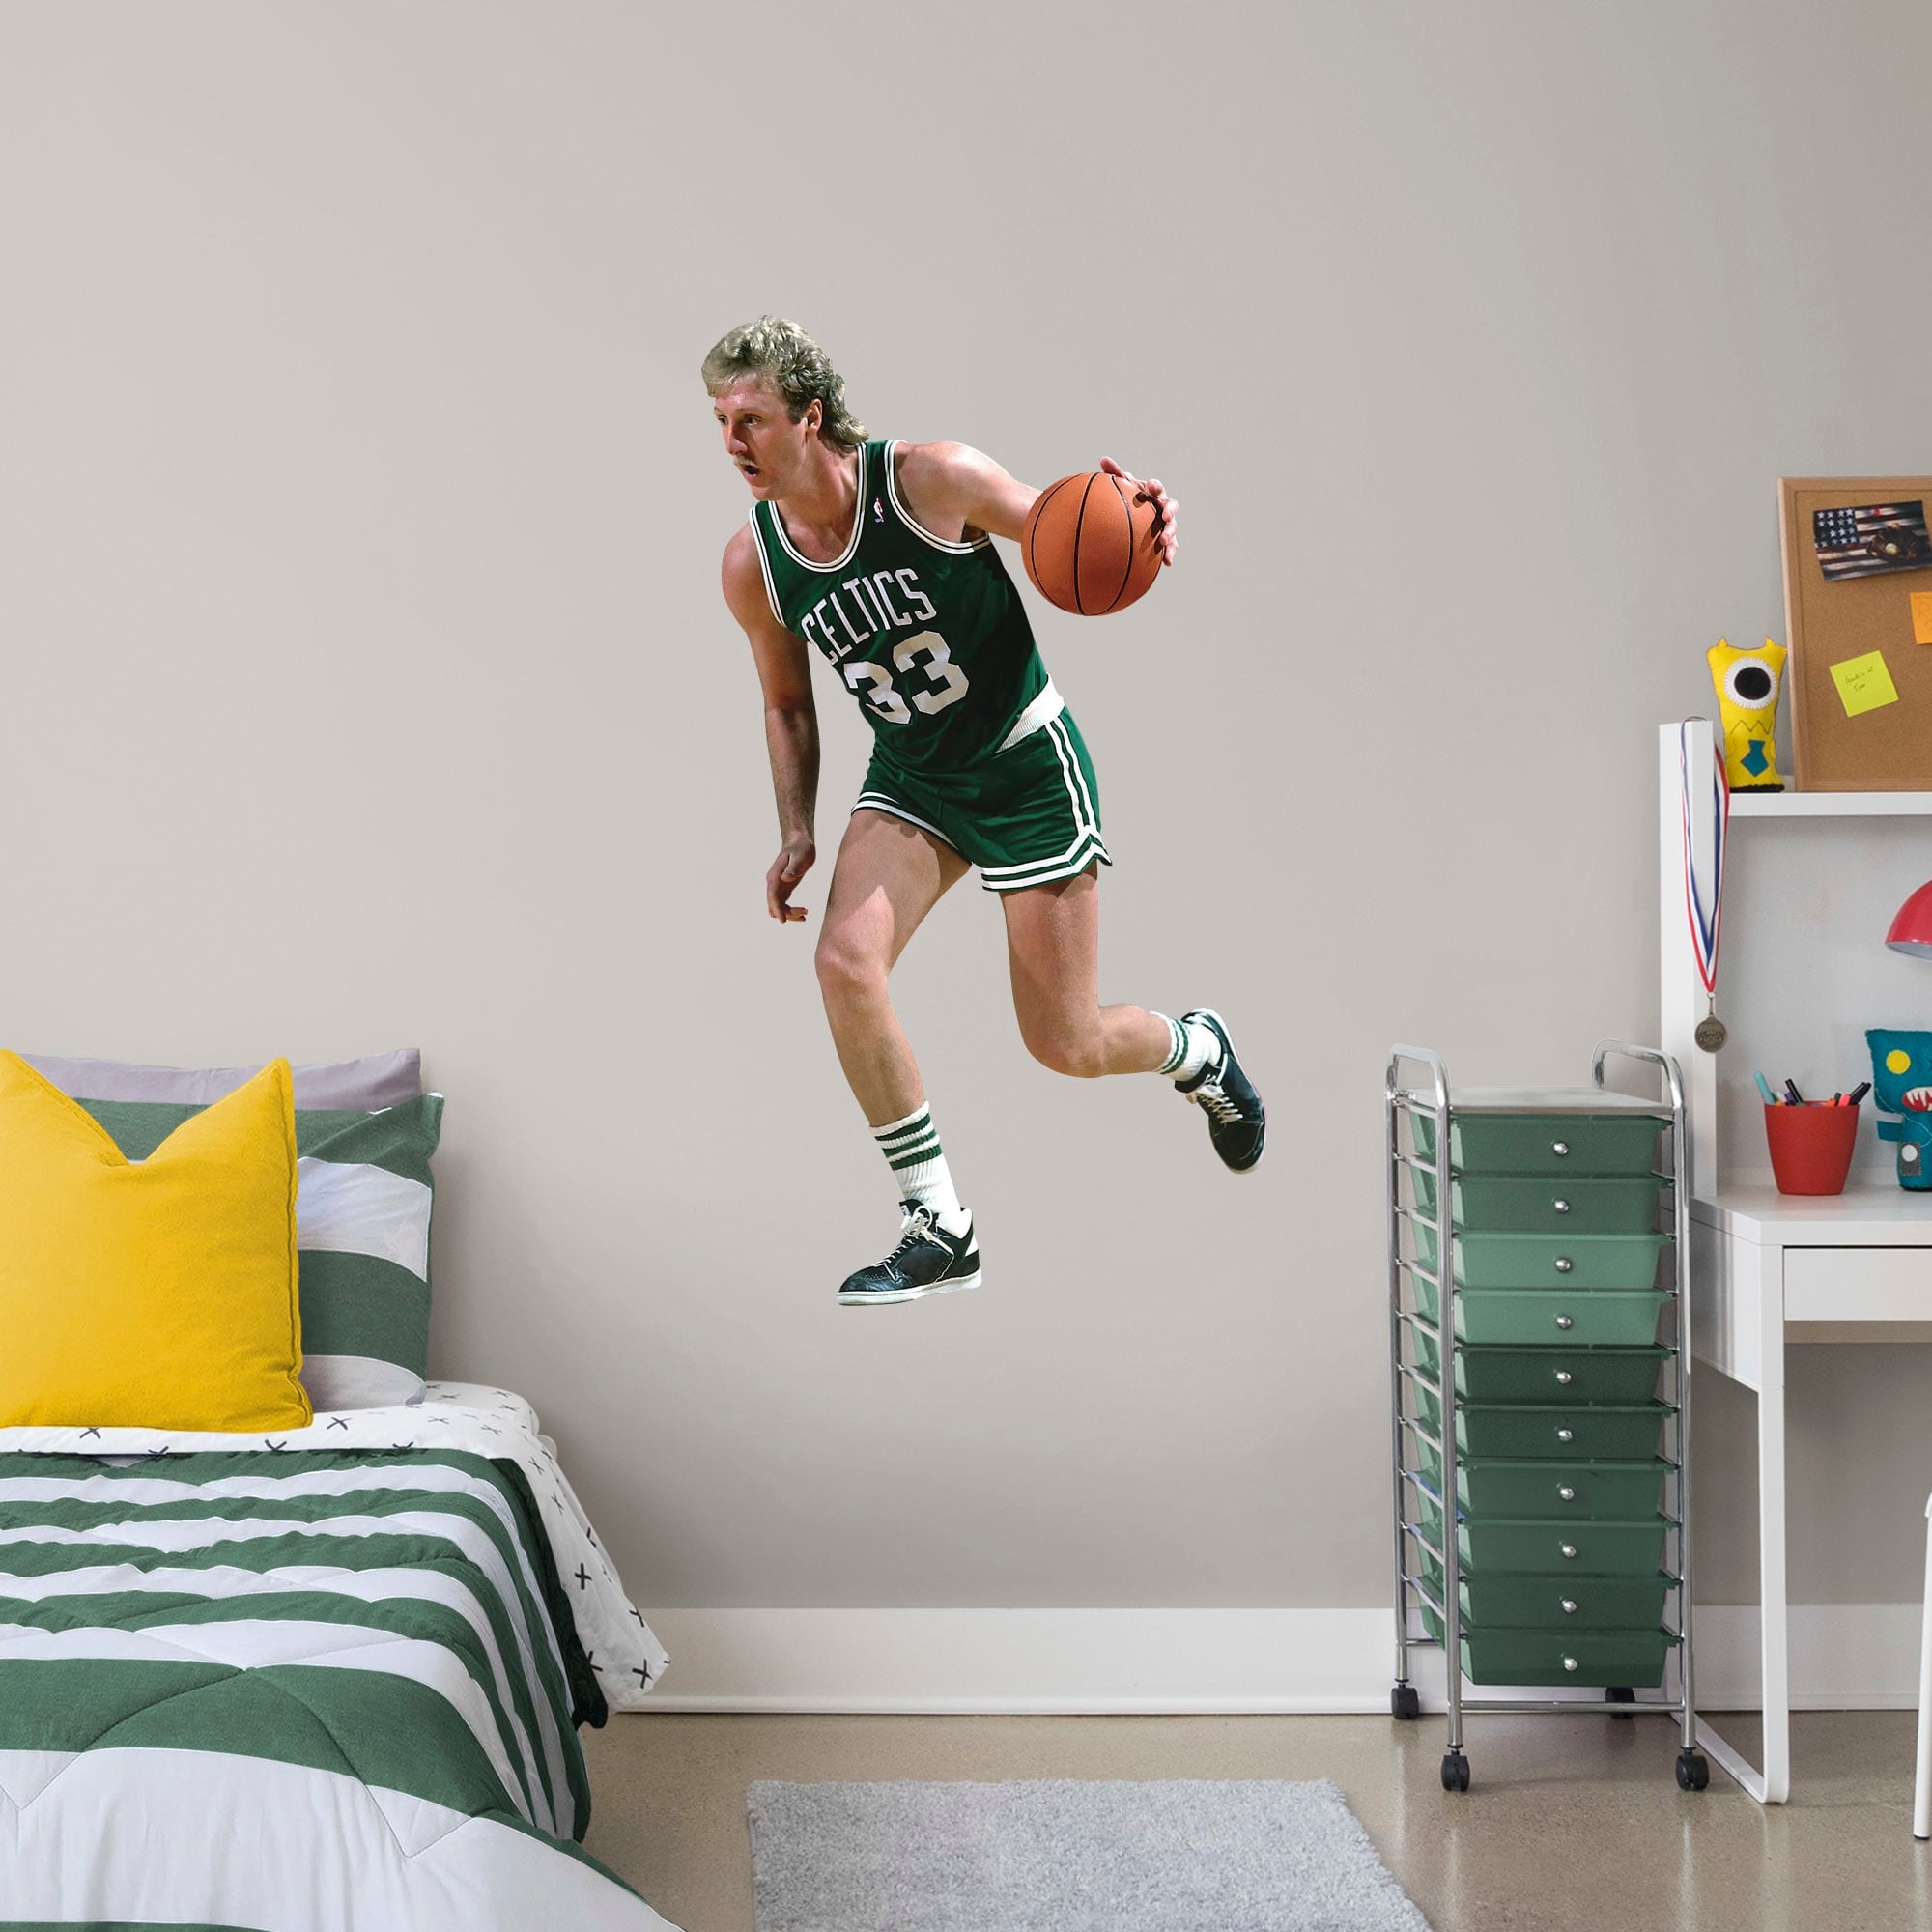 Larry Bird for Boston Celtics - Officially Licensed NBA Removable Wall Decal Giant Athlete + 2 Decals (30"W x 51"H) by Fathead |